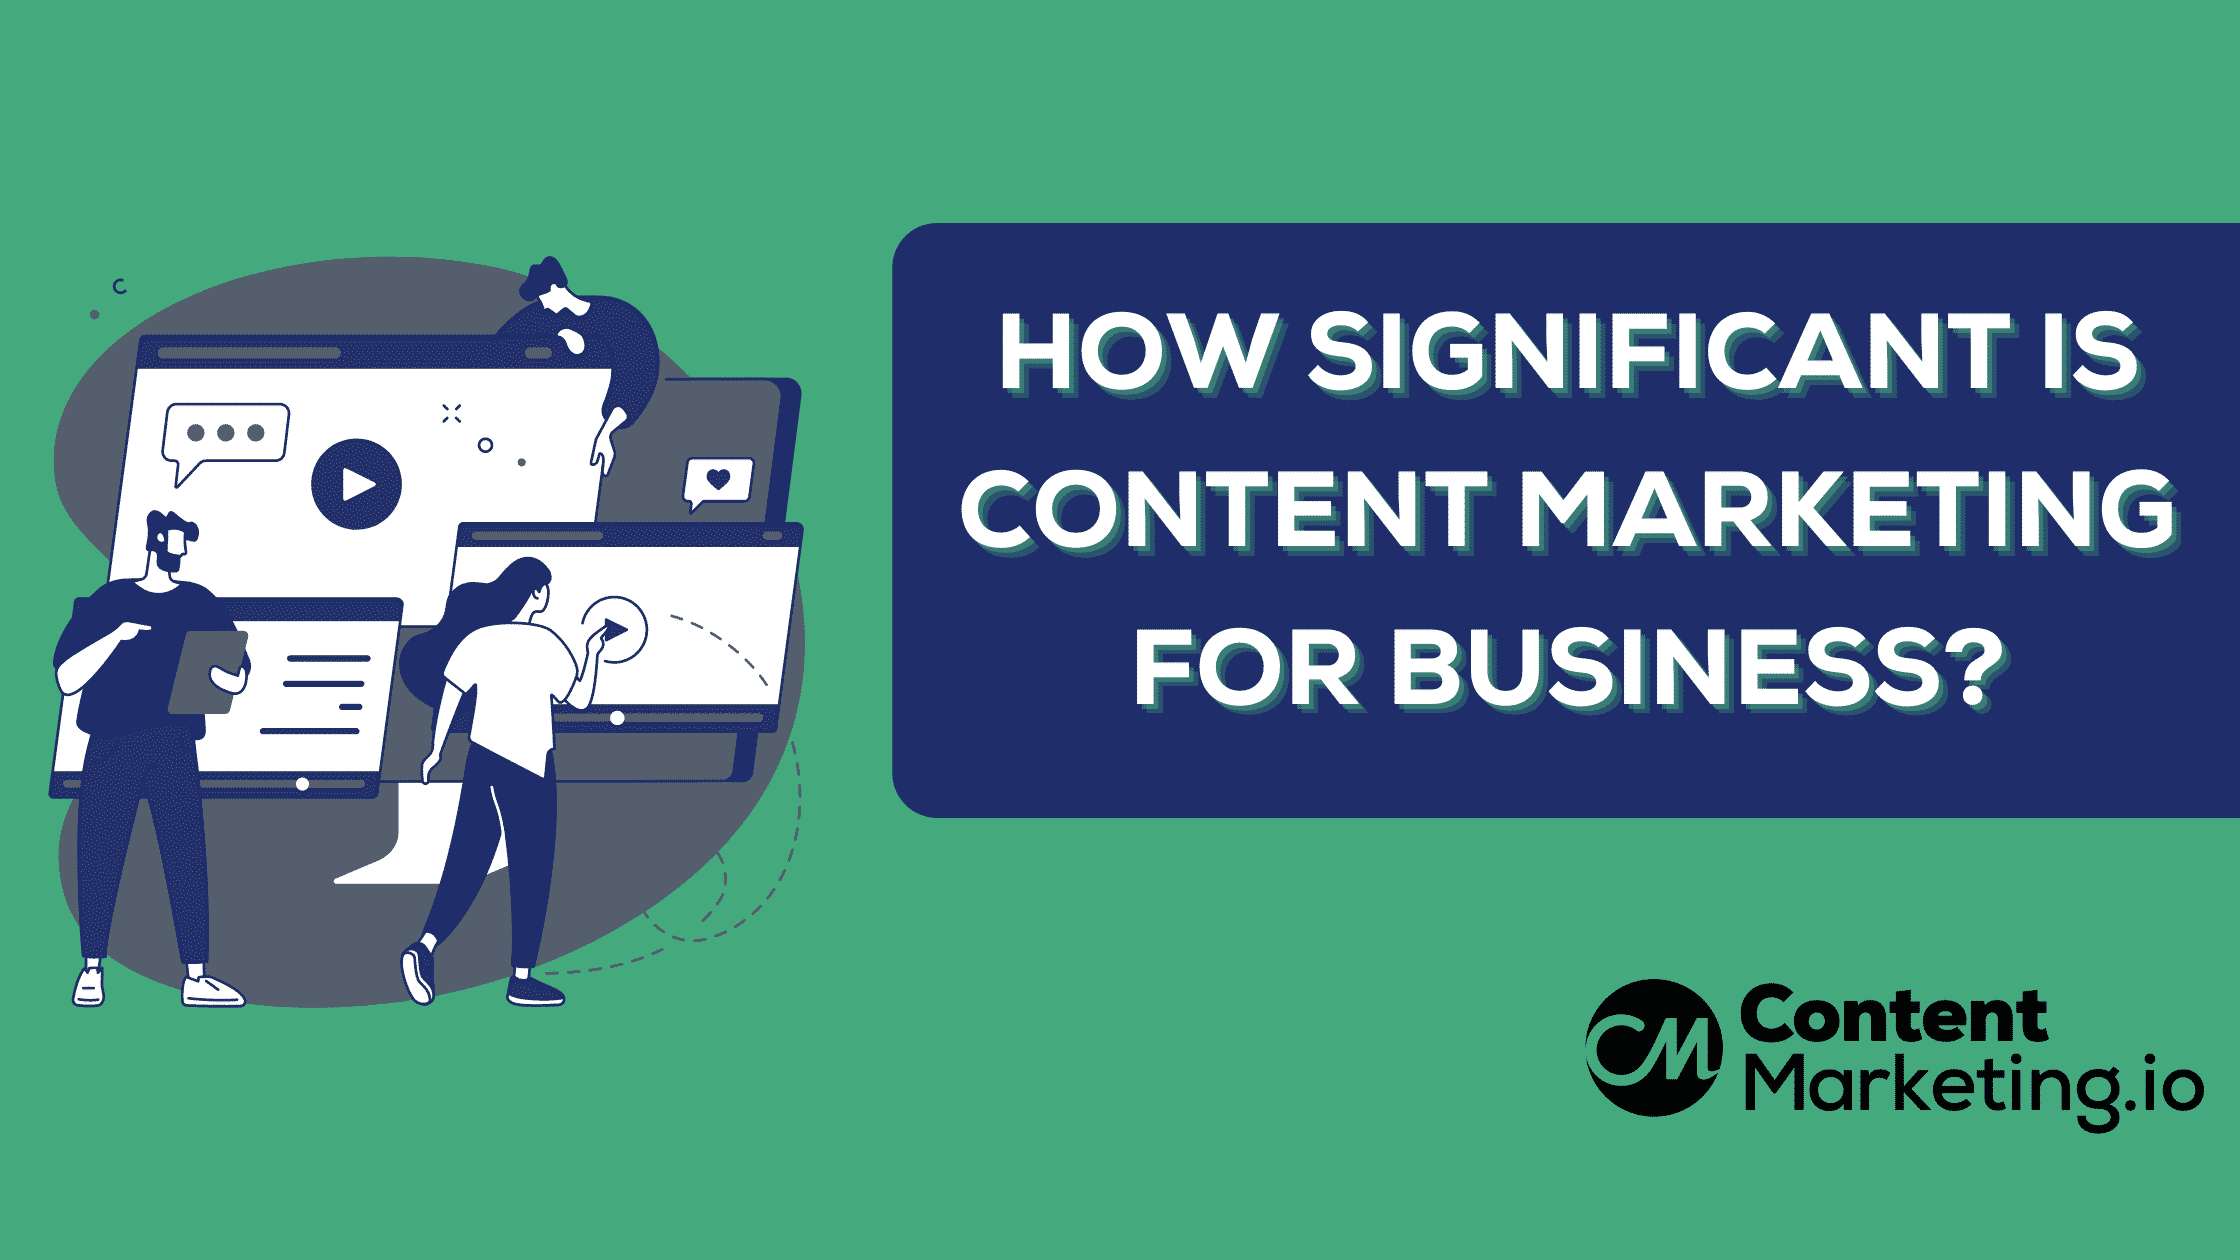 How Significant Is Content Marketing for Business